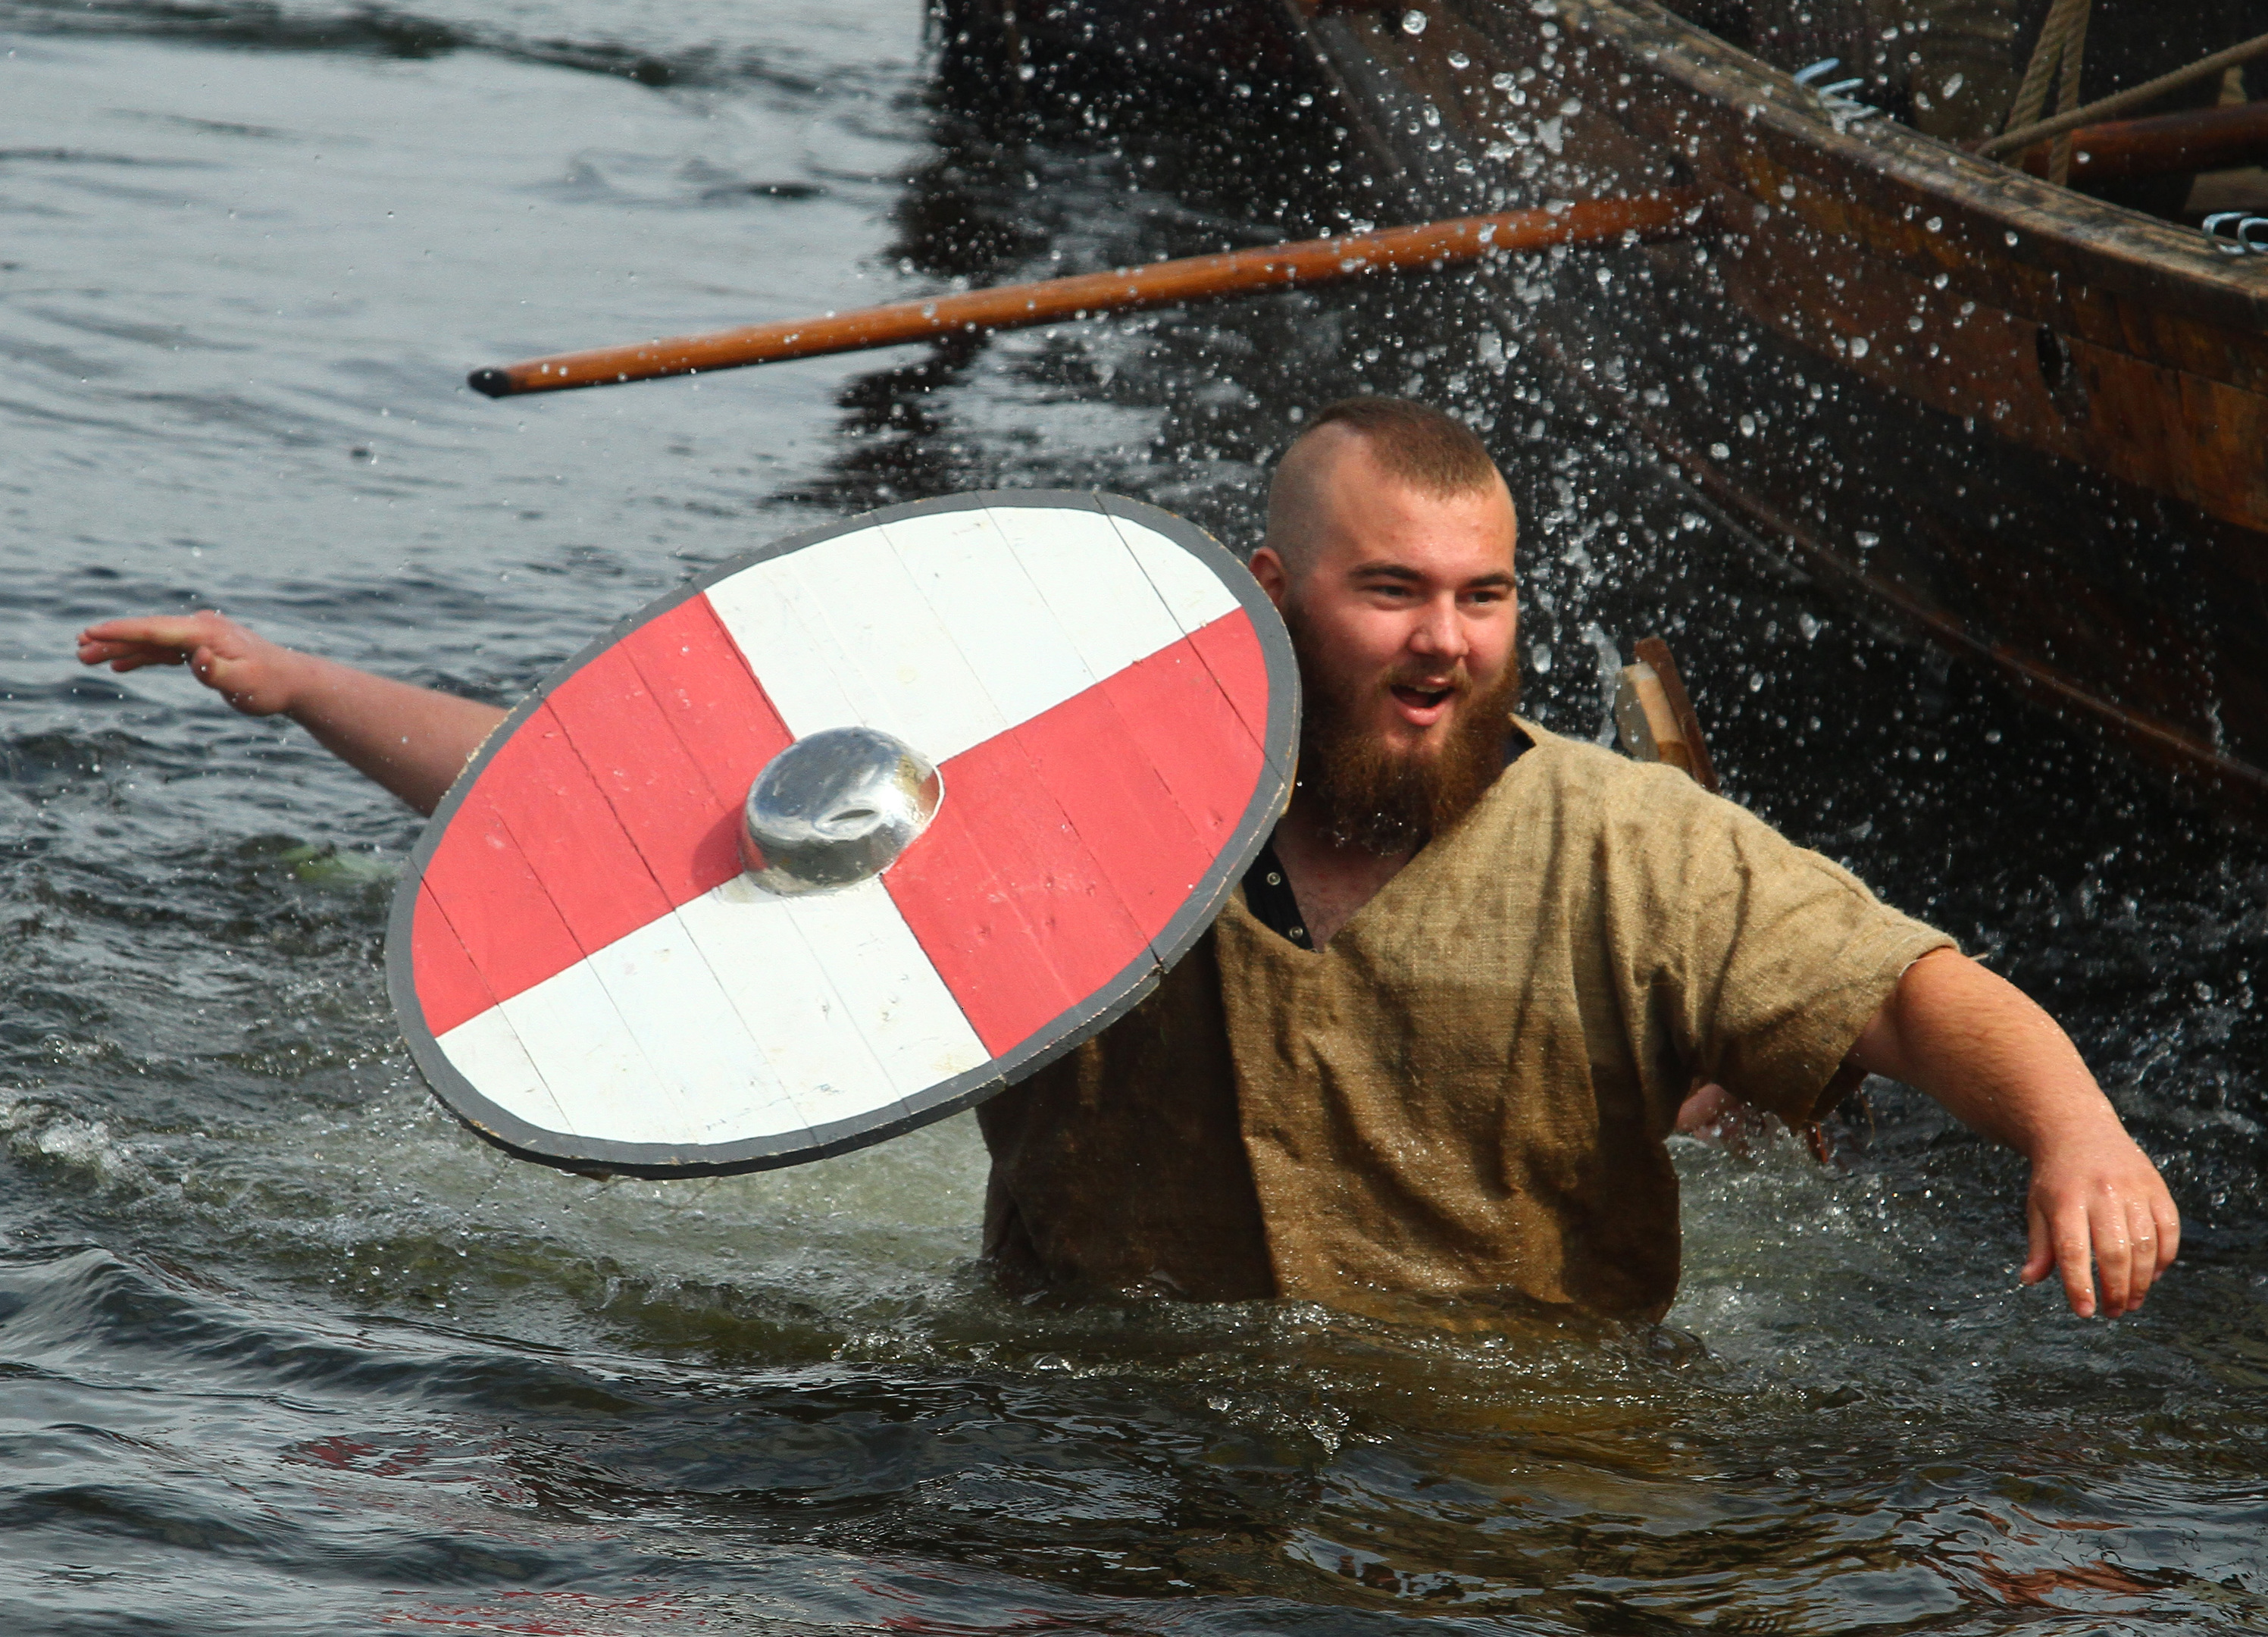 Vikings will invade Portsoy's boat festival this morning.